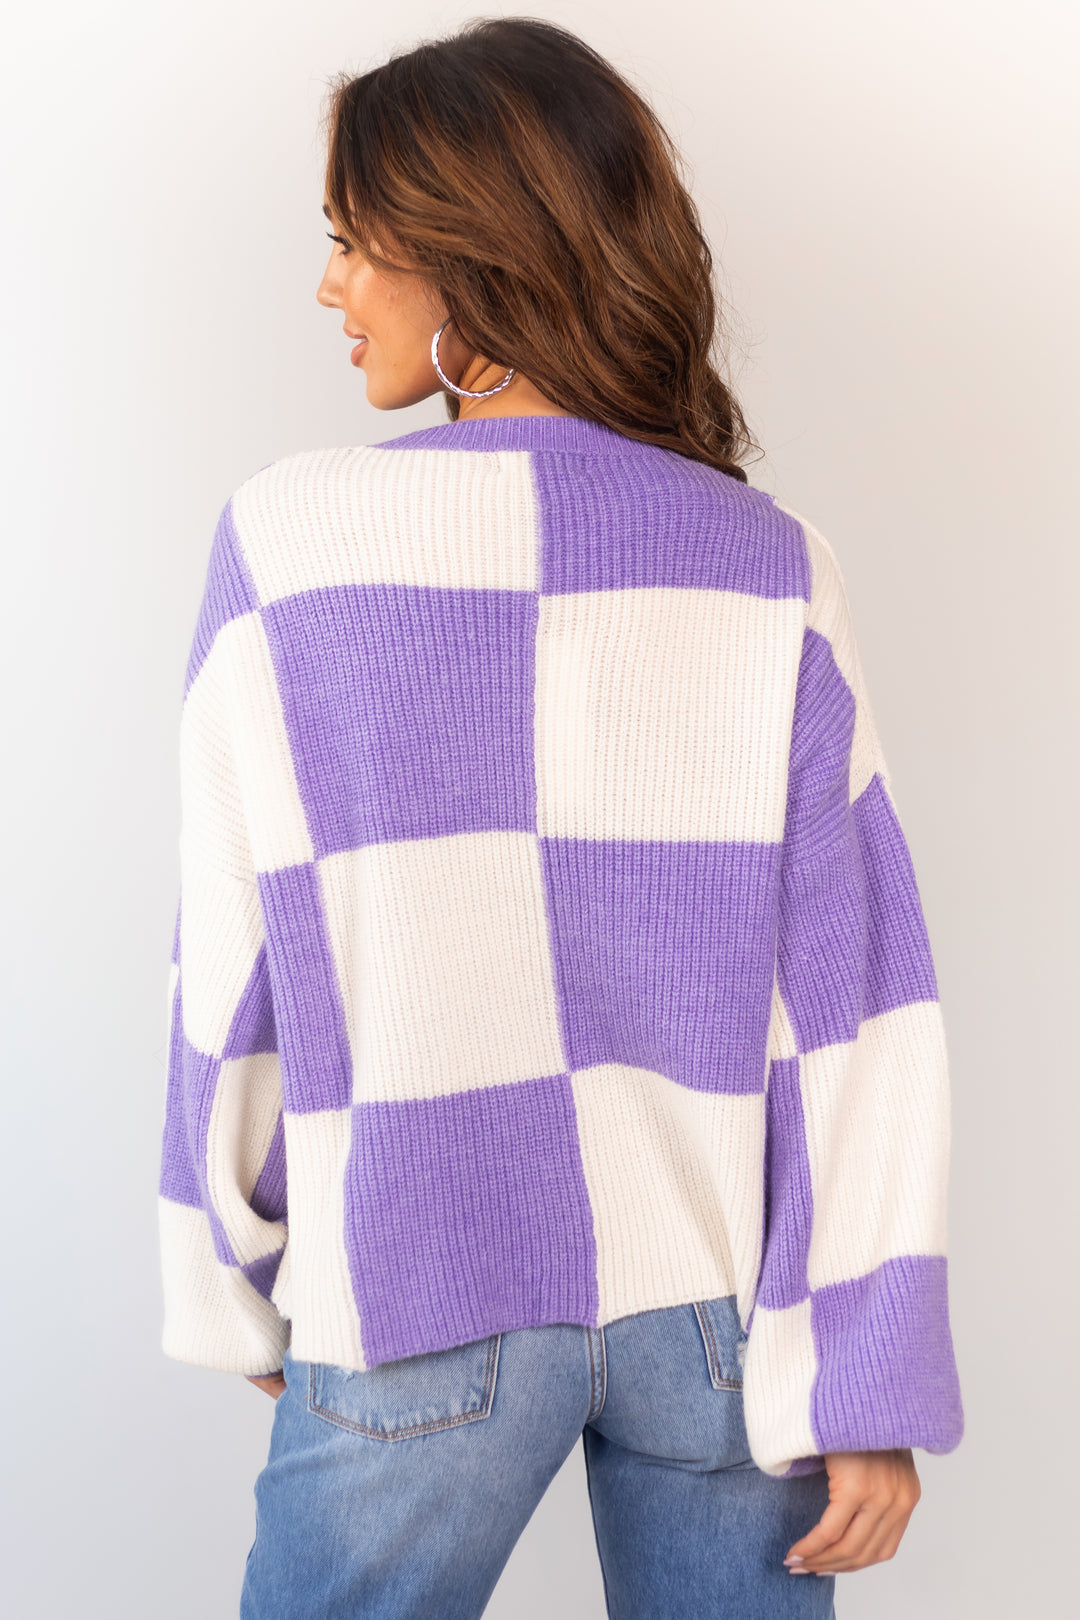 Louis Vuitton Purple And Beige Checkerboard Sweater - Tagotee